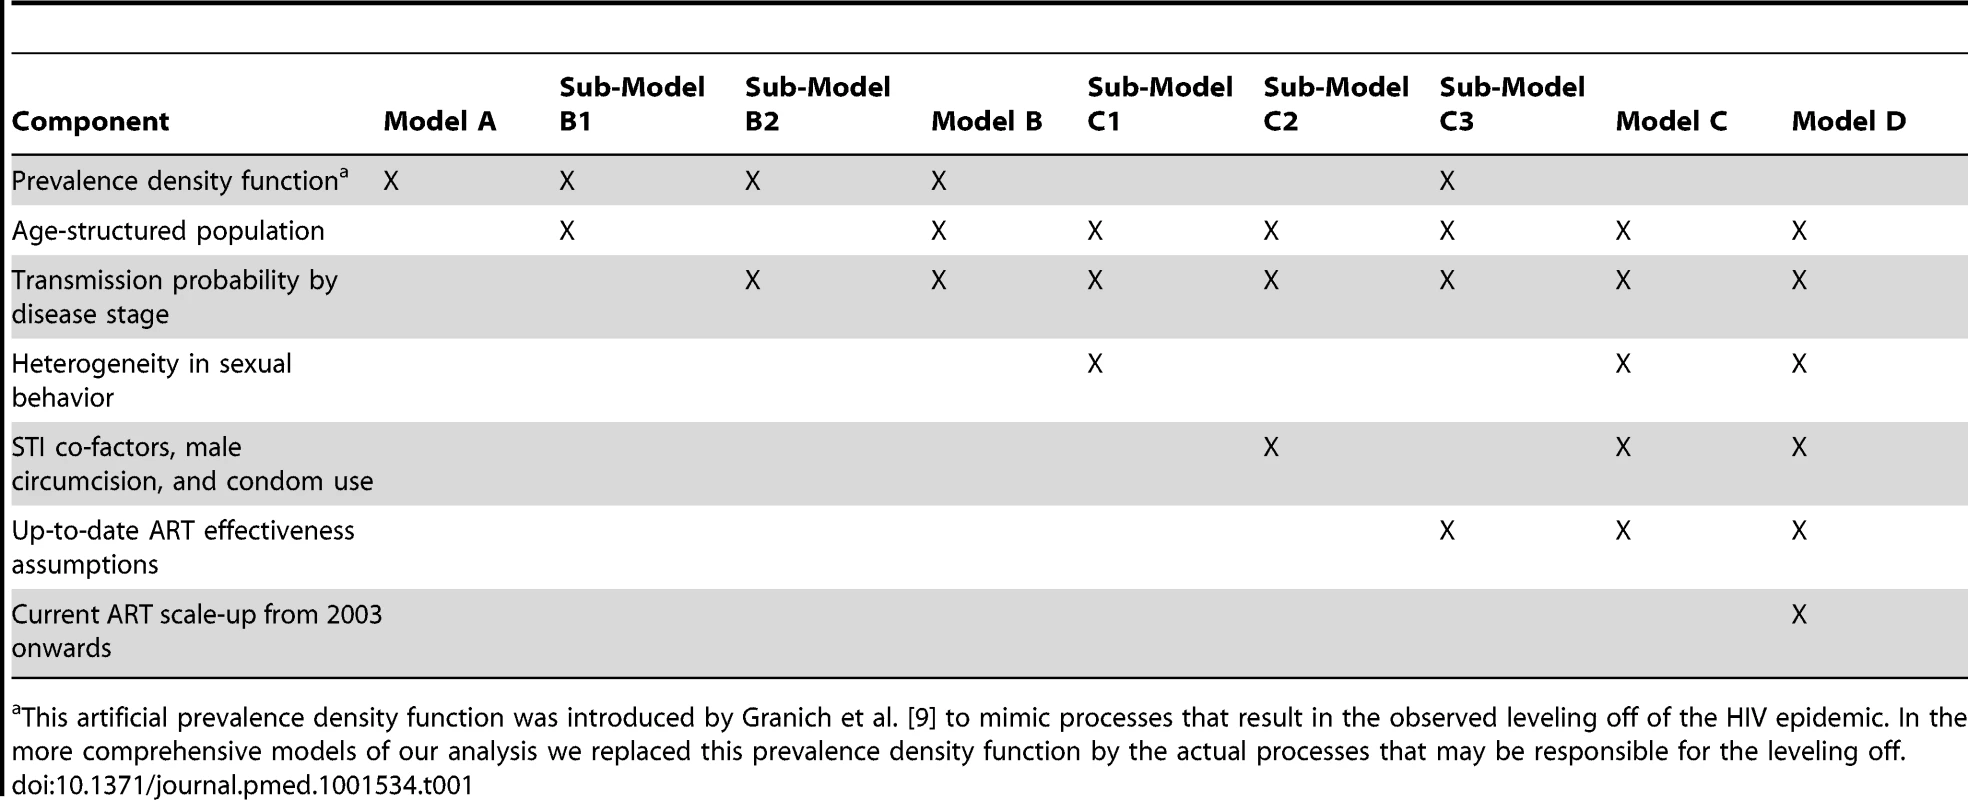 Overview of successive addition of components and structures to each of the nine models.